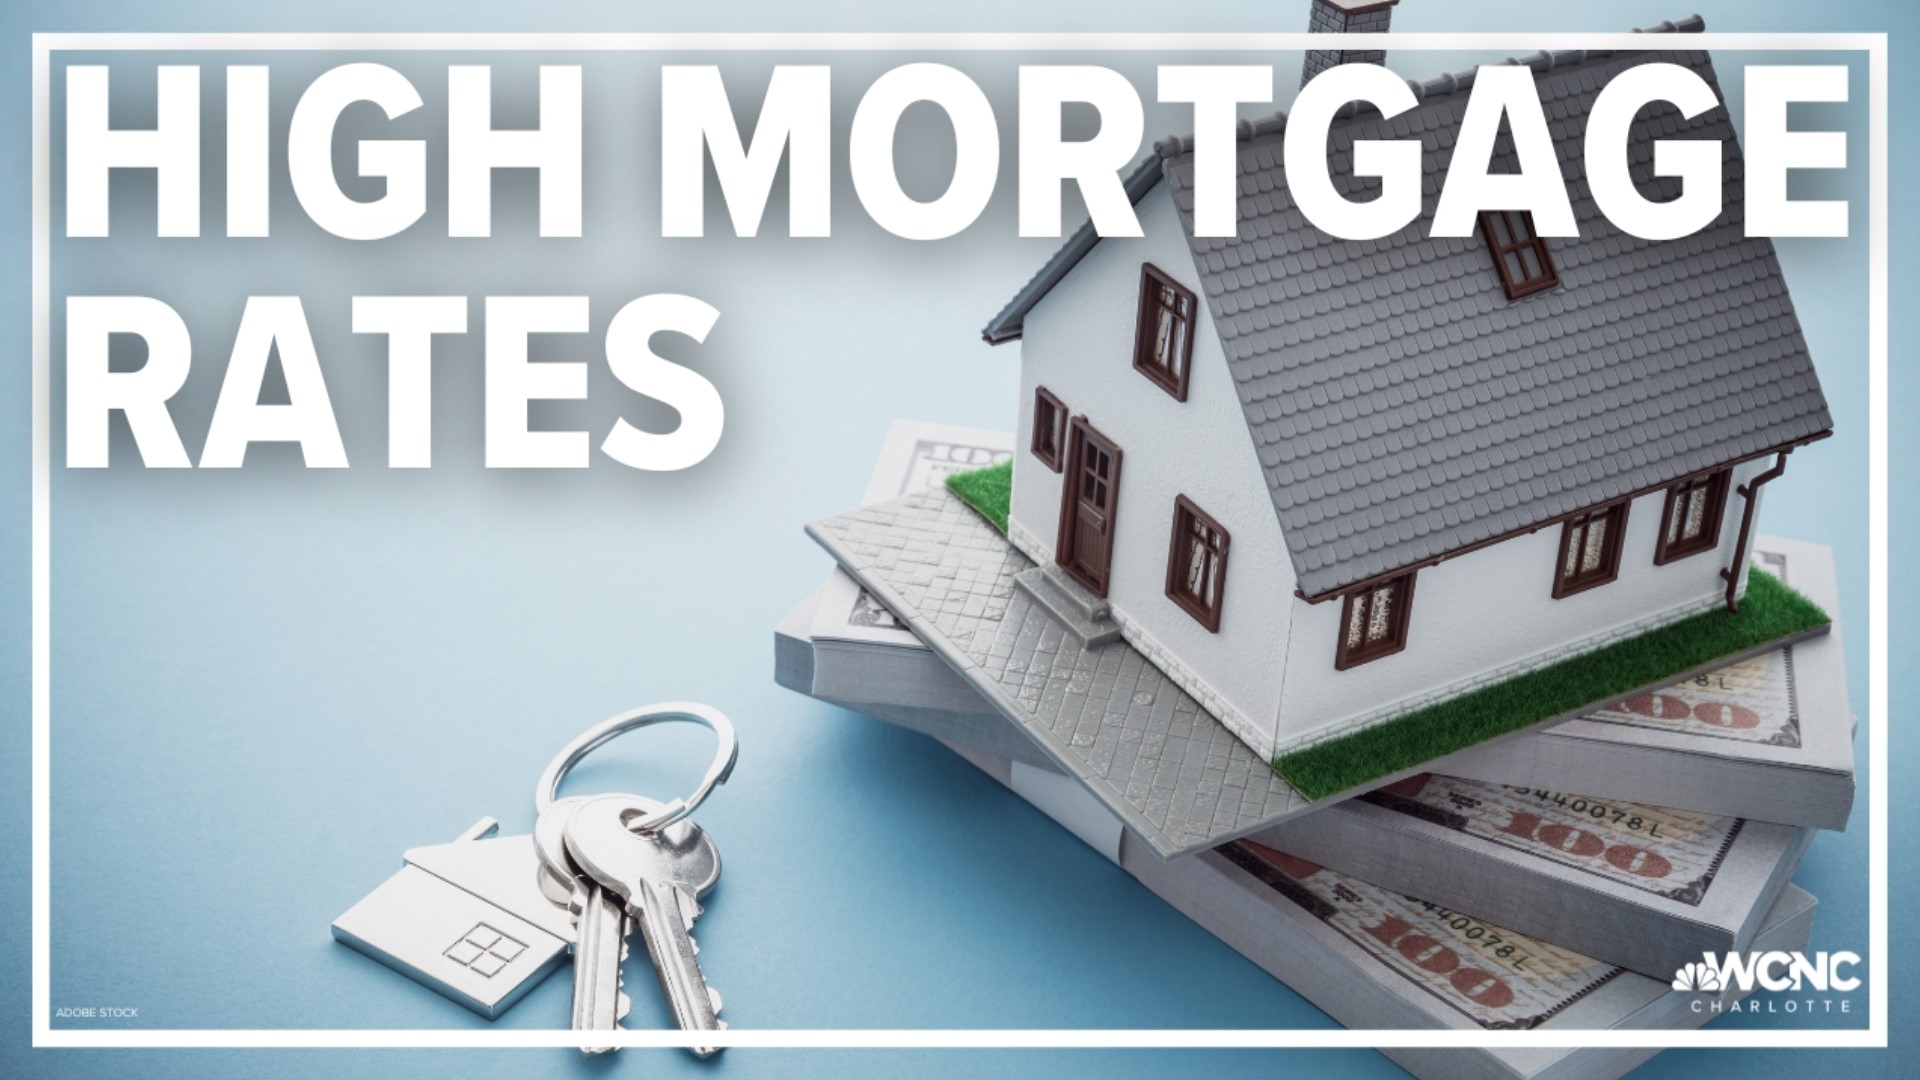 The average rate for a 30-year mortgage is around 6%, according to new data from Freddie Mac. That's more than double what it was this same time last year.